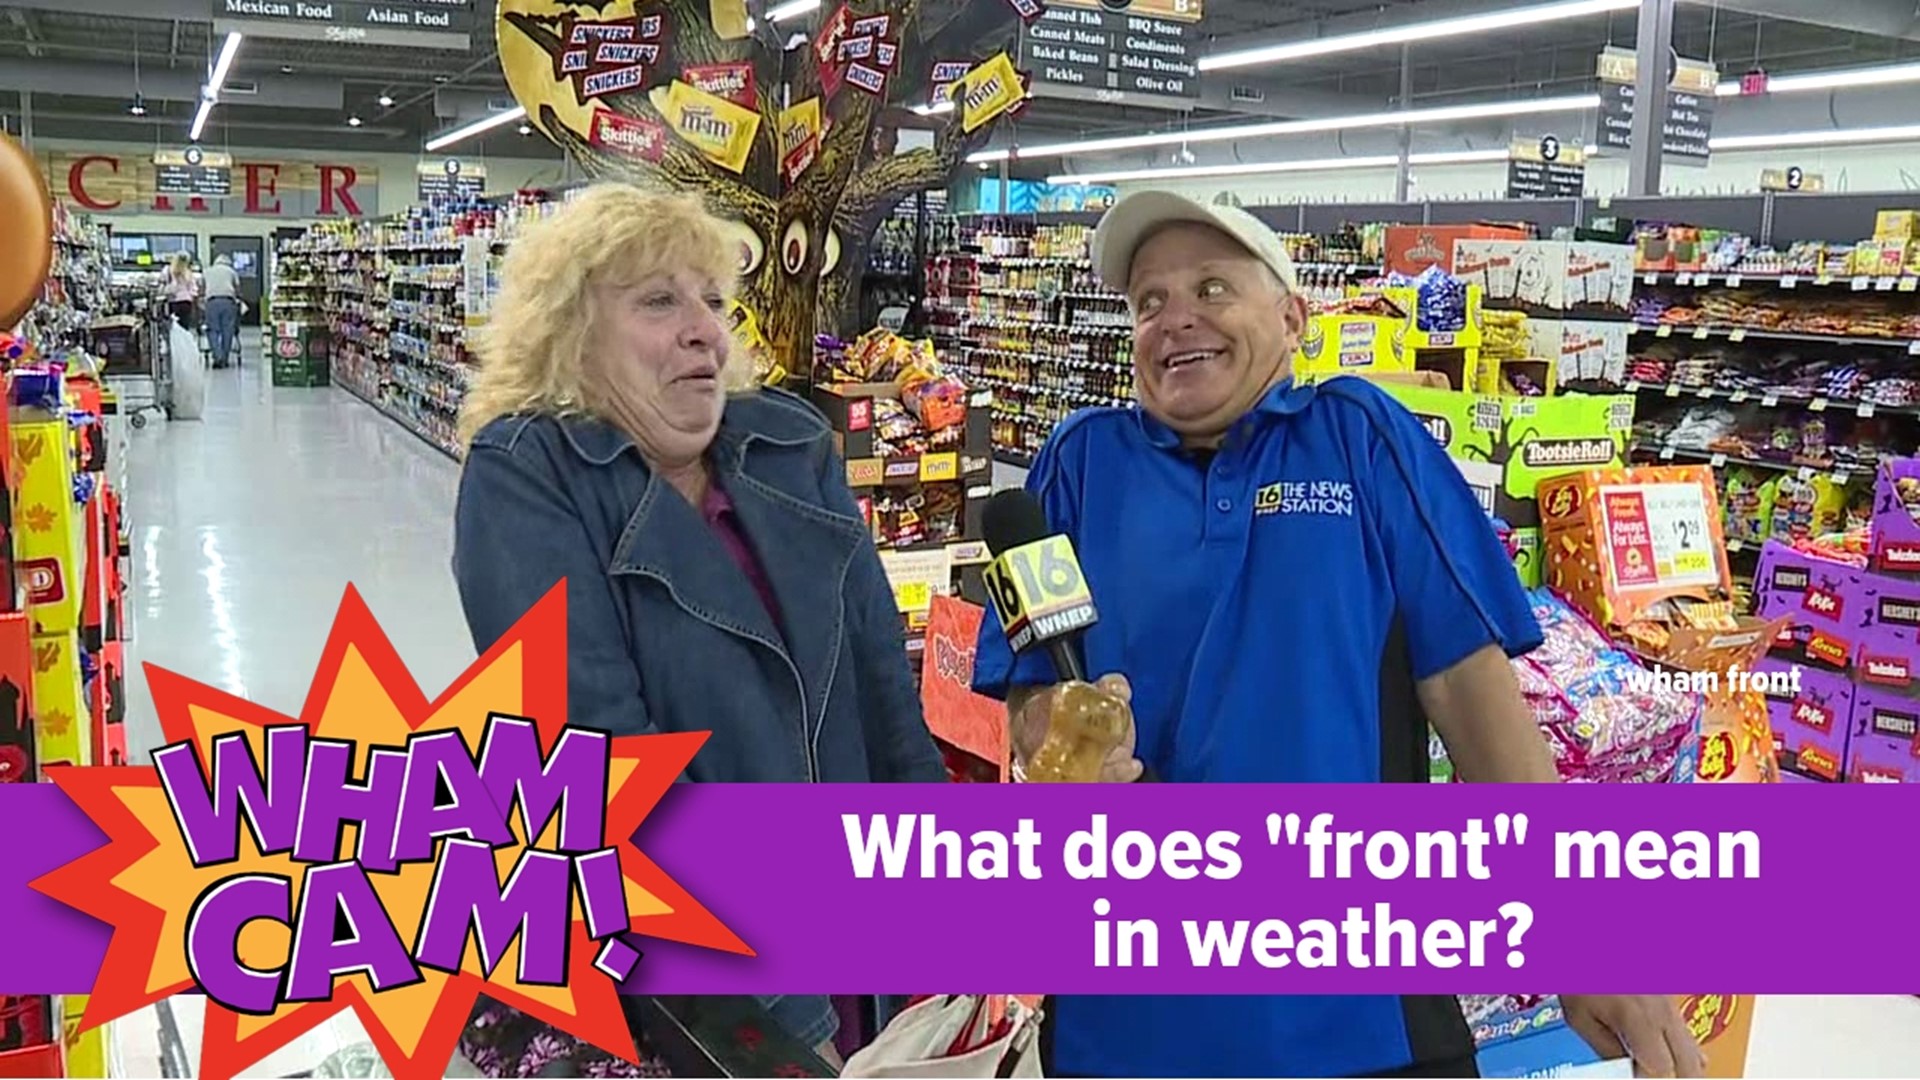 As we're heading into fall, Joe's thinking about the cold fronts that come with it. He was in Moosic to see if anyone there knows where the term "front" comes from.